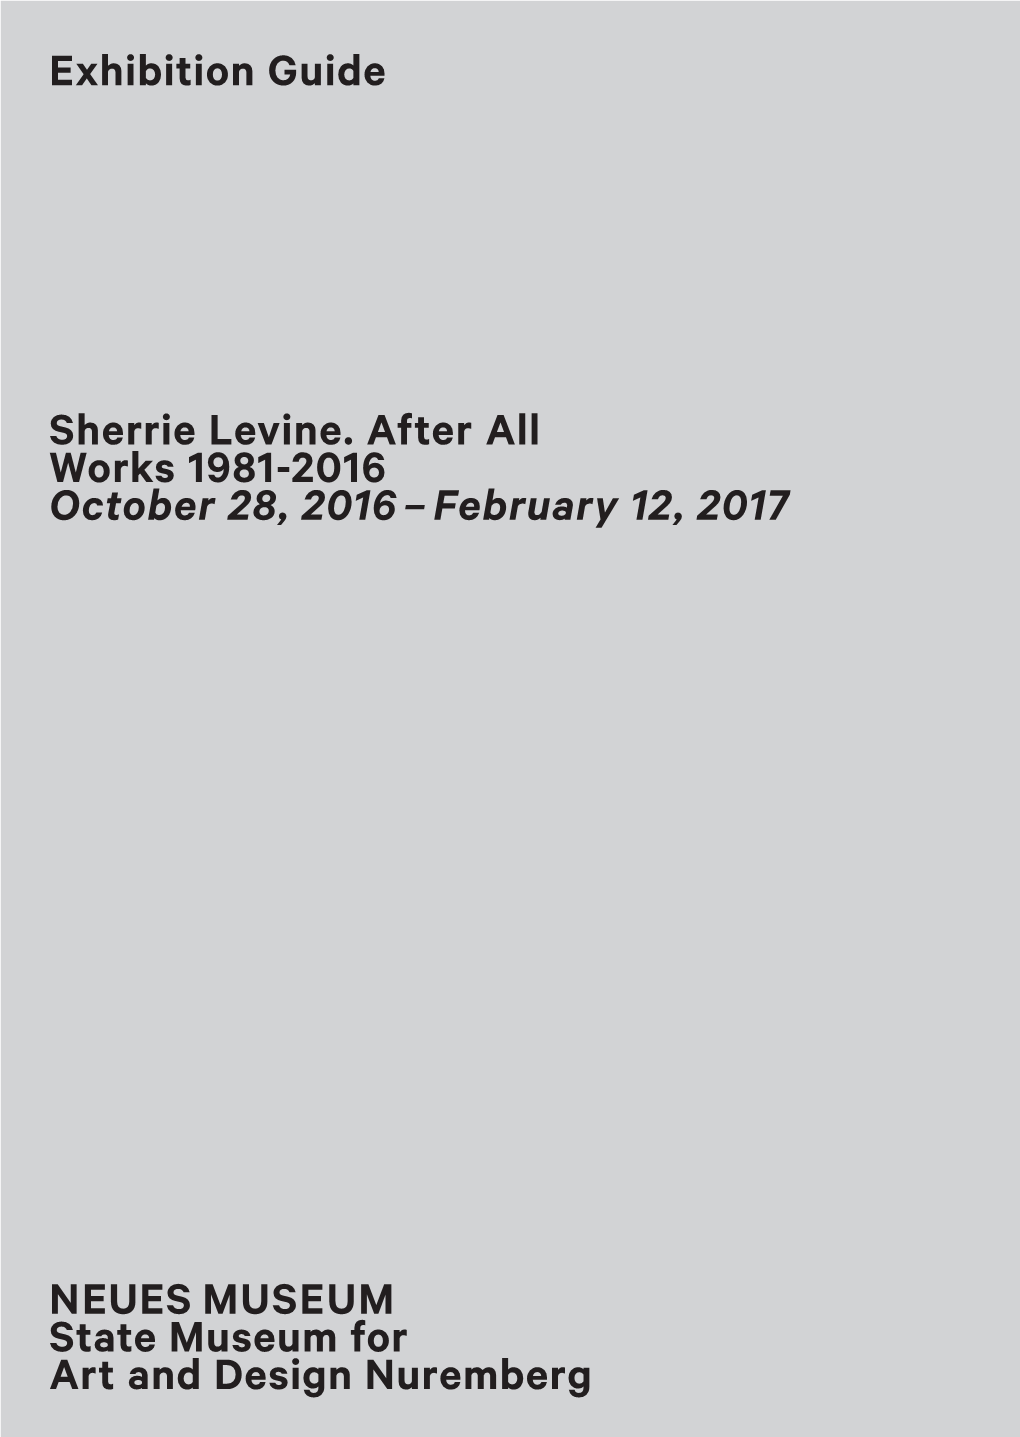 Sherrie Levine. After All Works 1981-2016 October 28, 2016 – February 12, 2017